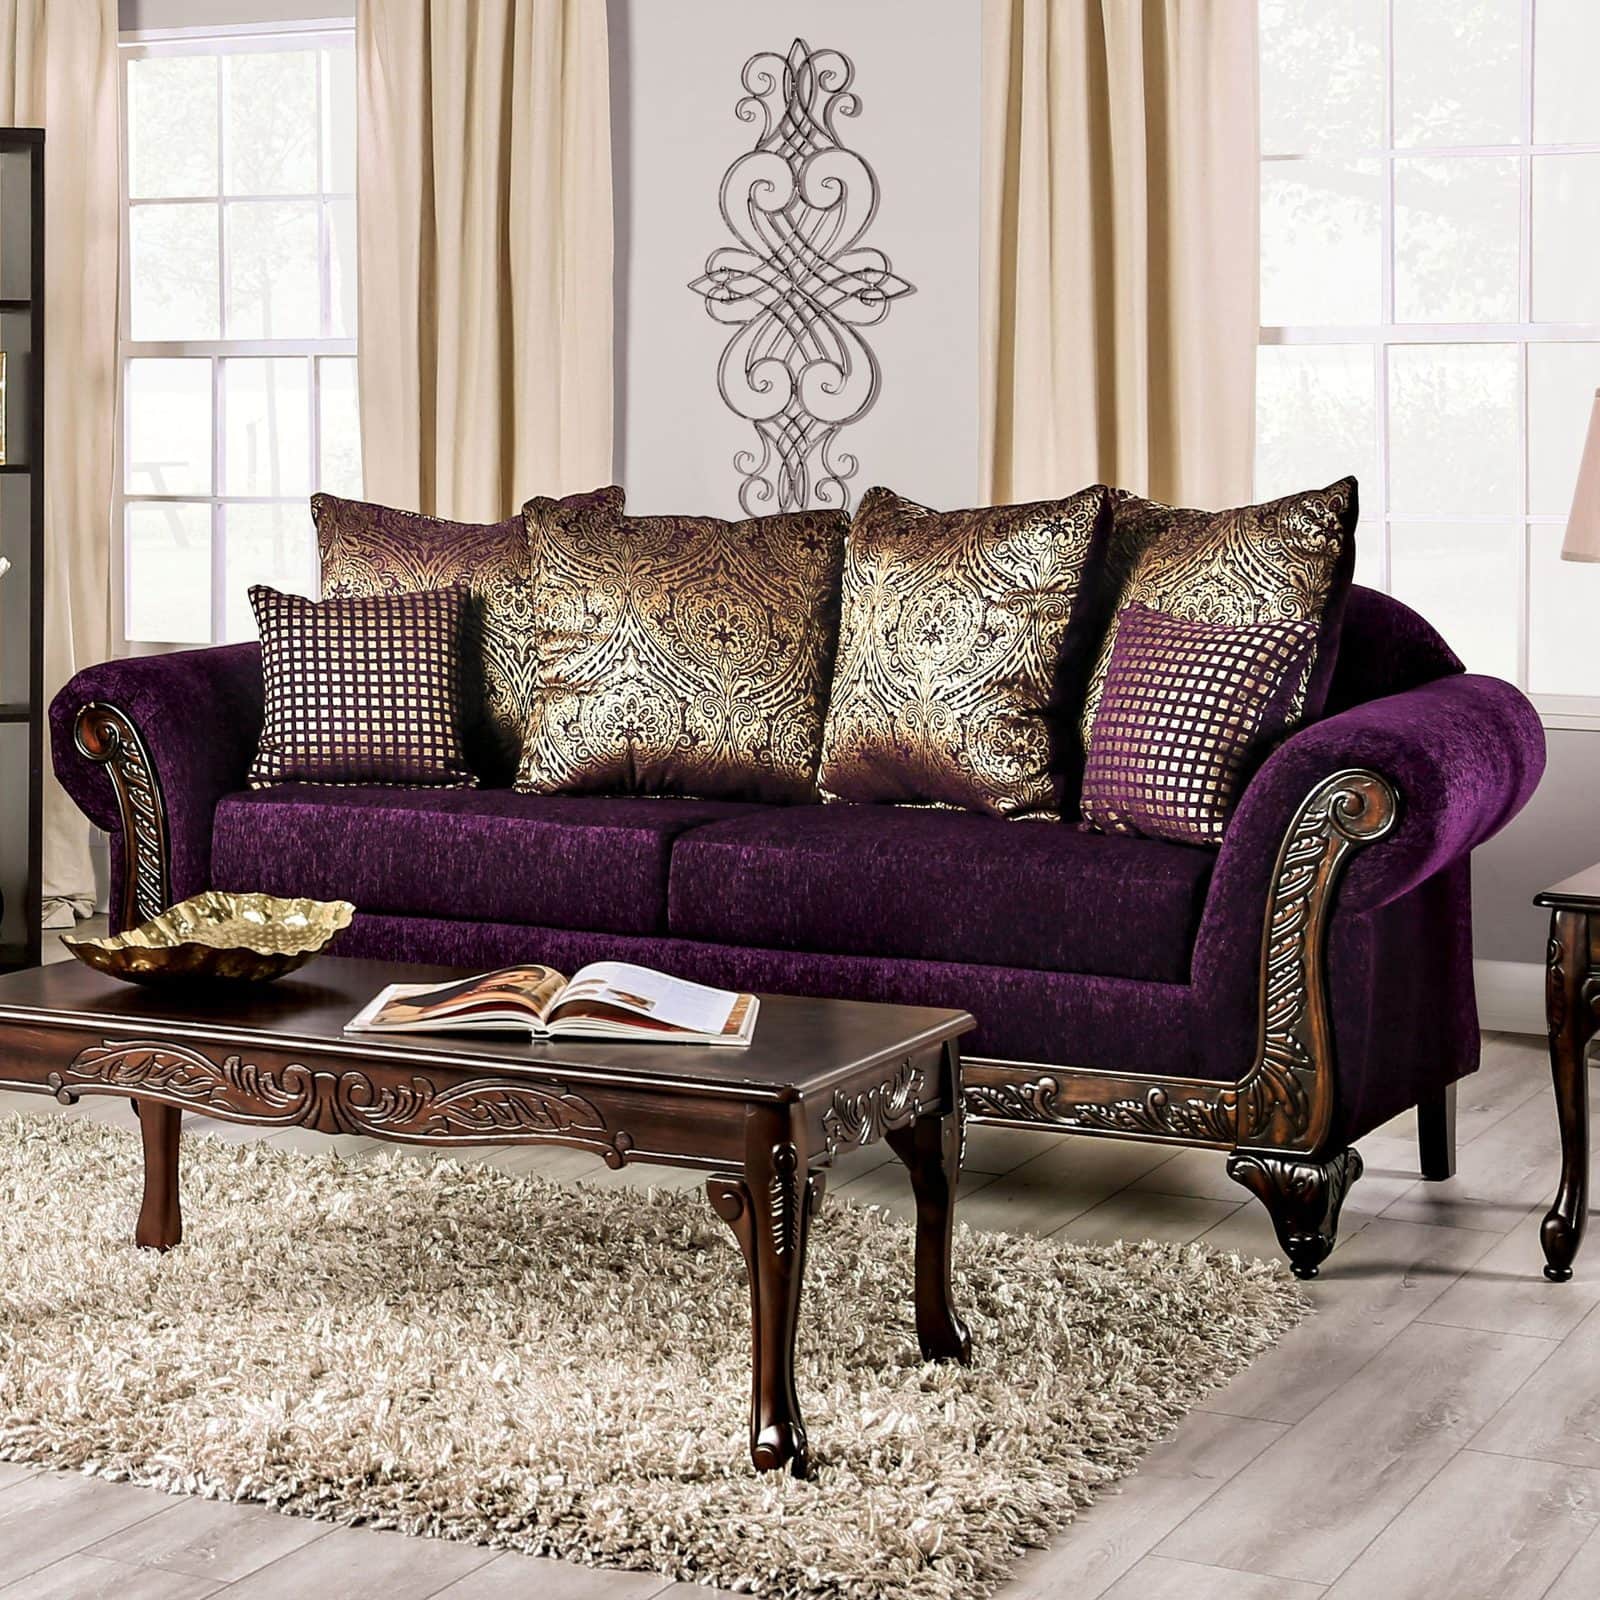 Pull Off a Regal Look with Deep Purple